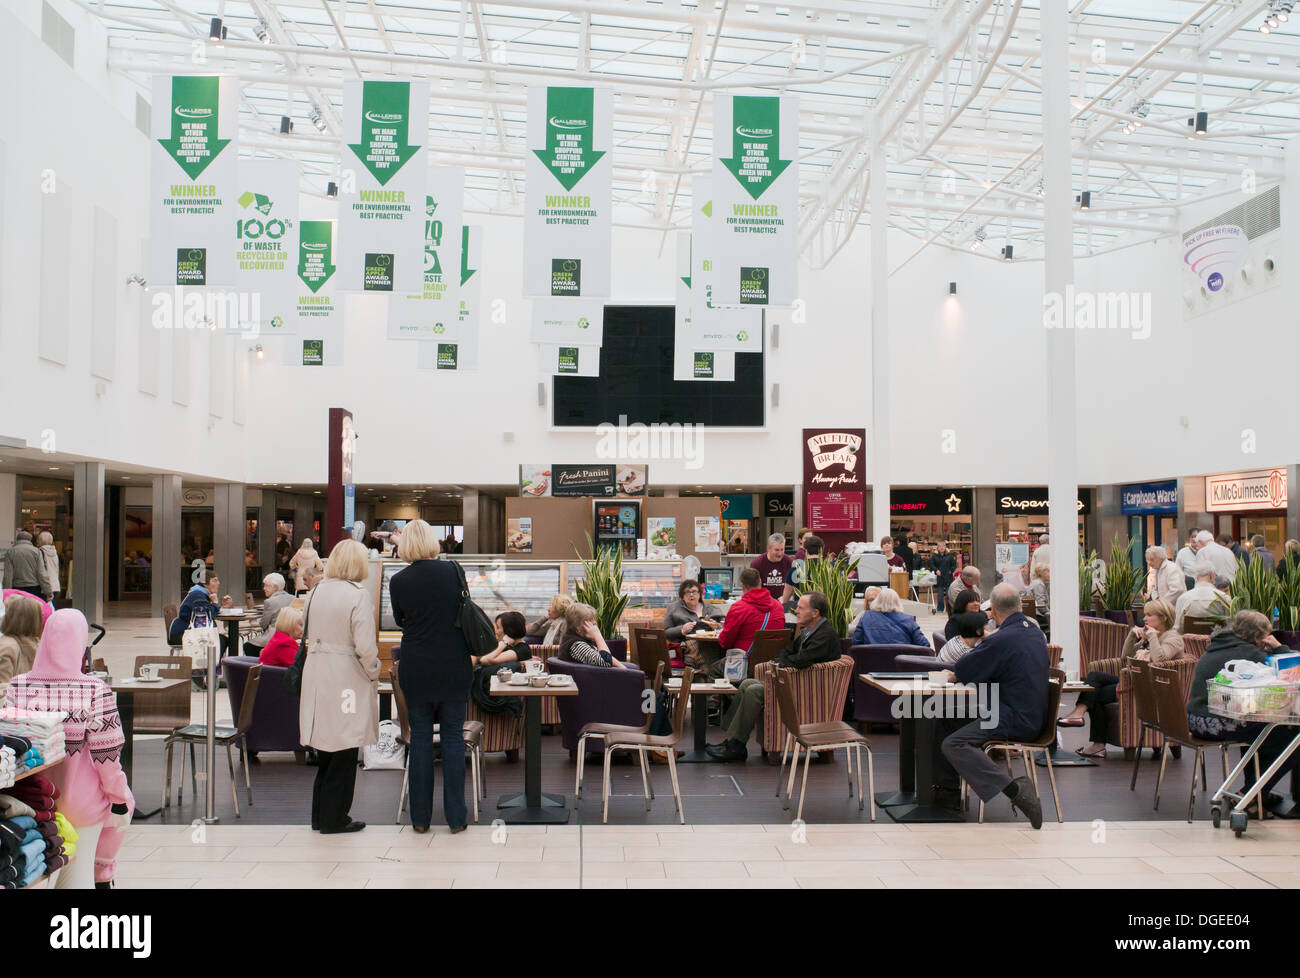 People seated at café within the atrium at Washington Galleries shopping centre, north east England, UK Stock Photo